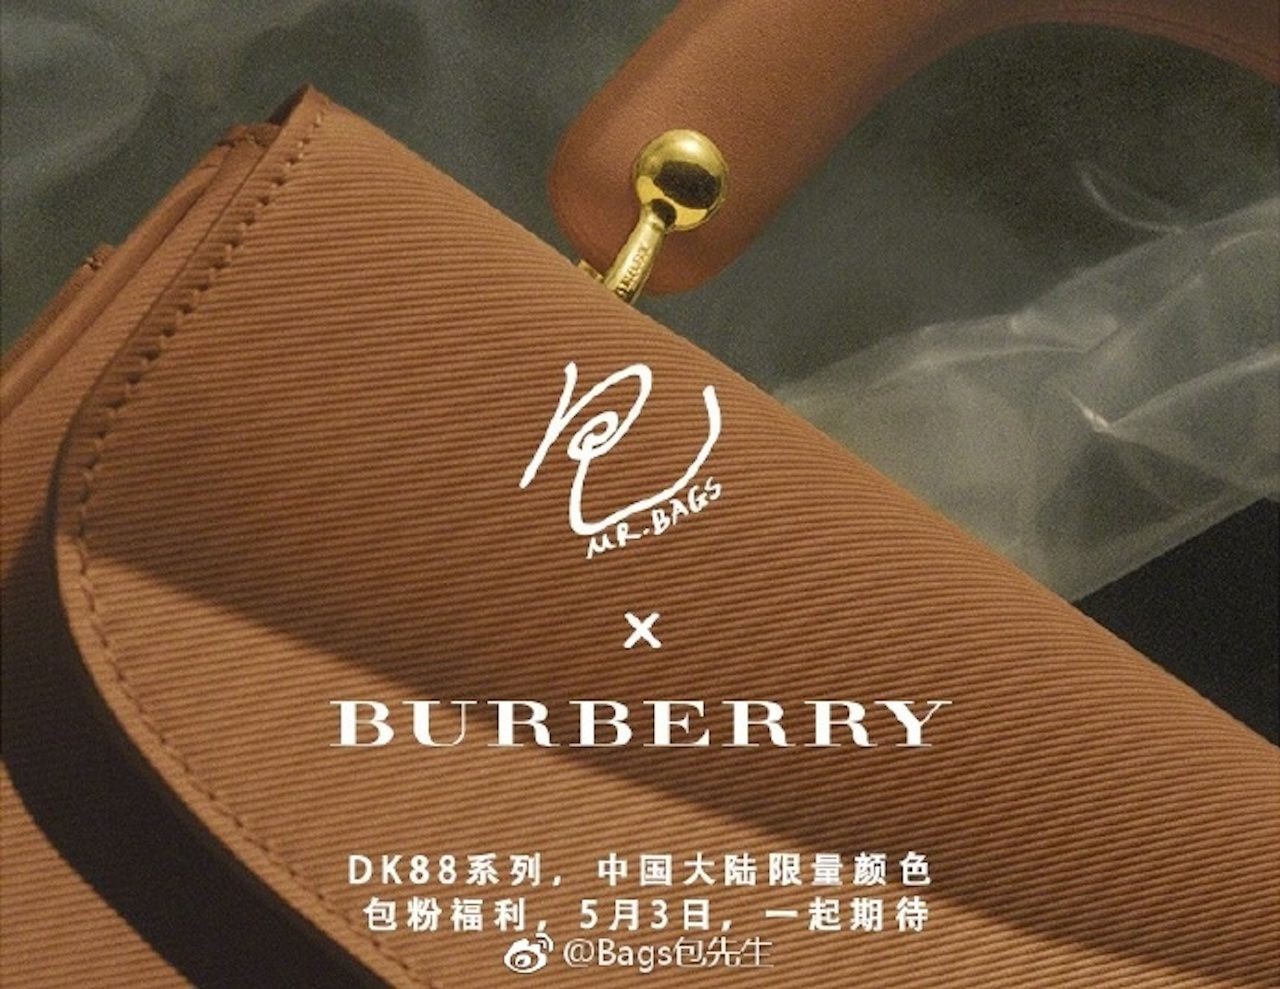 Burberry Teams Up with Top Fashion Blogger for Exclusive WeChat Launch